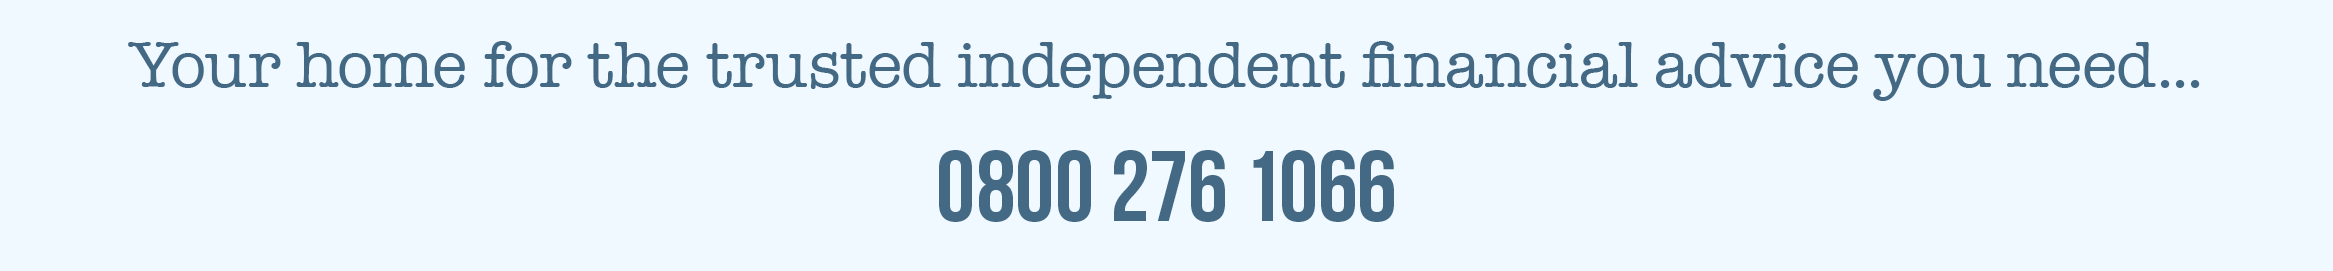 Your home for the trusted independent financial advice you need... : 0800 276 1066